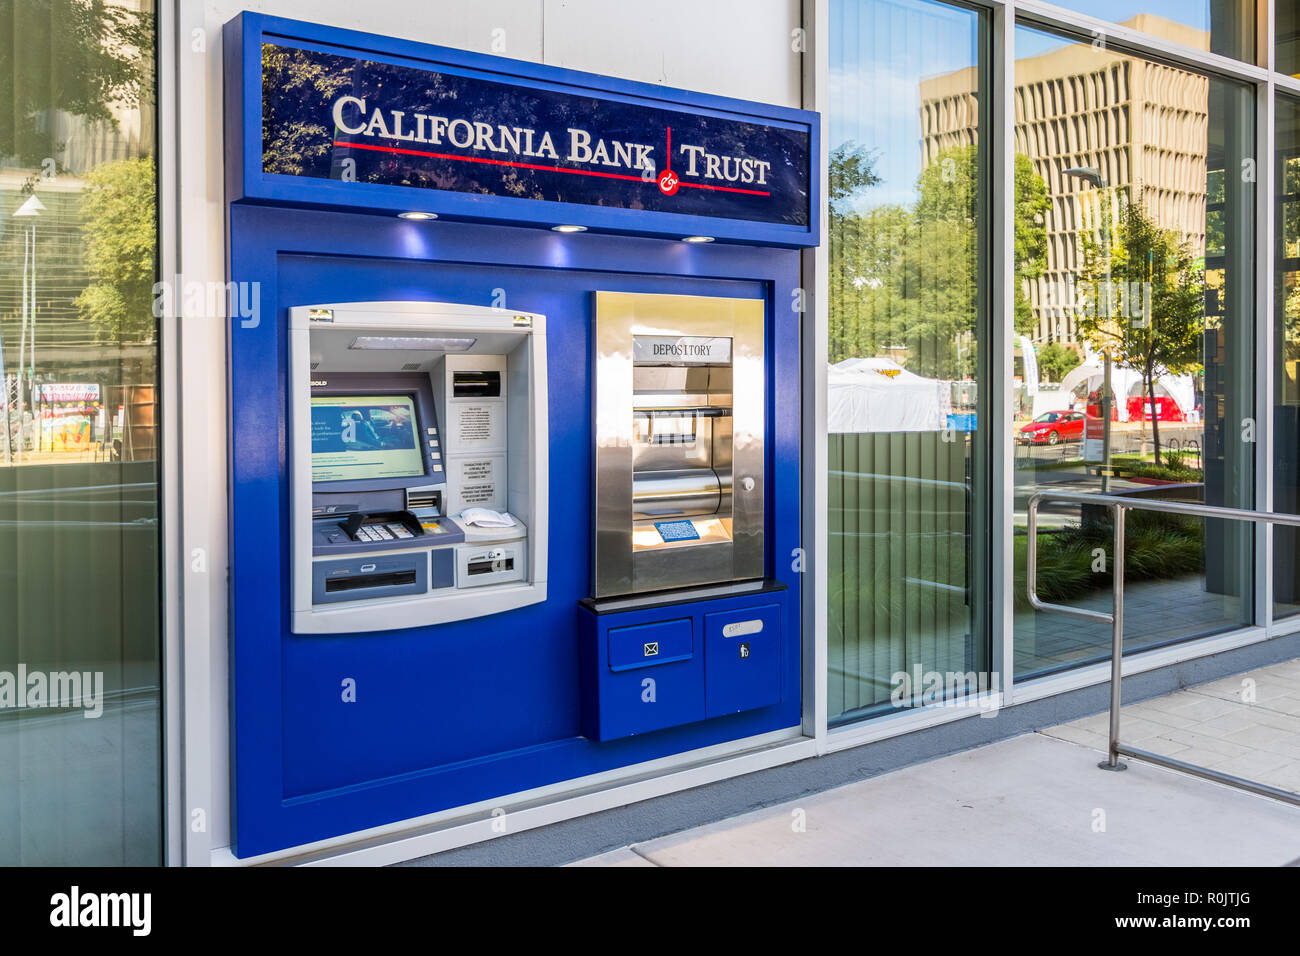 September 22, 2018 Sacramento / CA / USA - California Bank & Trust branch located on Capitol Mall in the downtown area Stock Photo